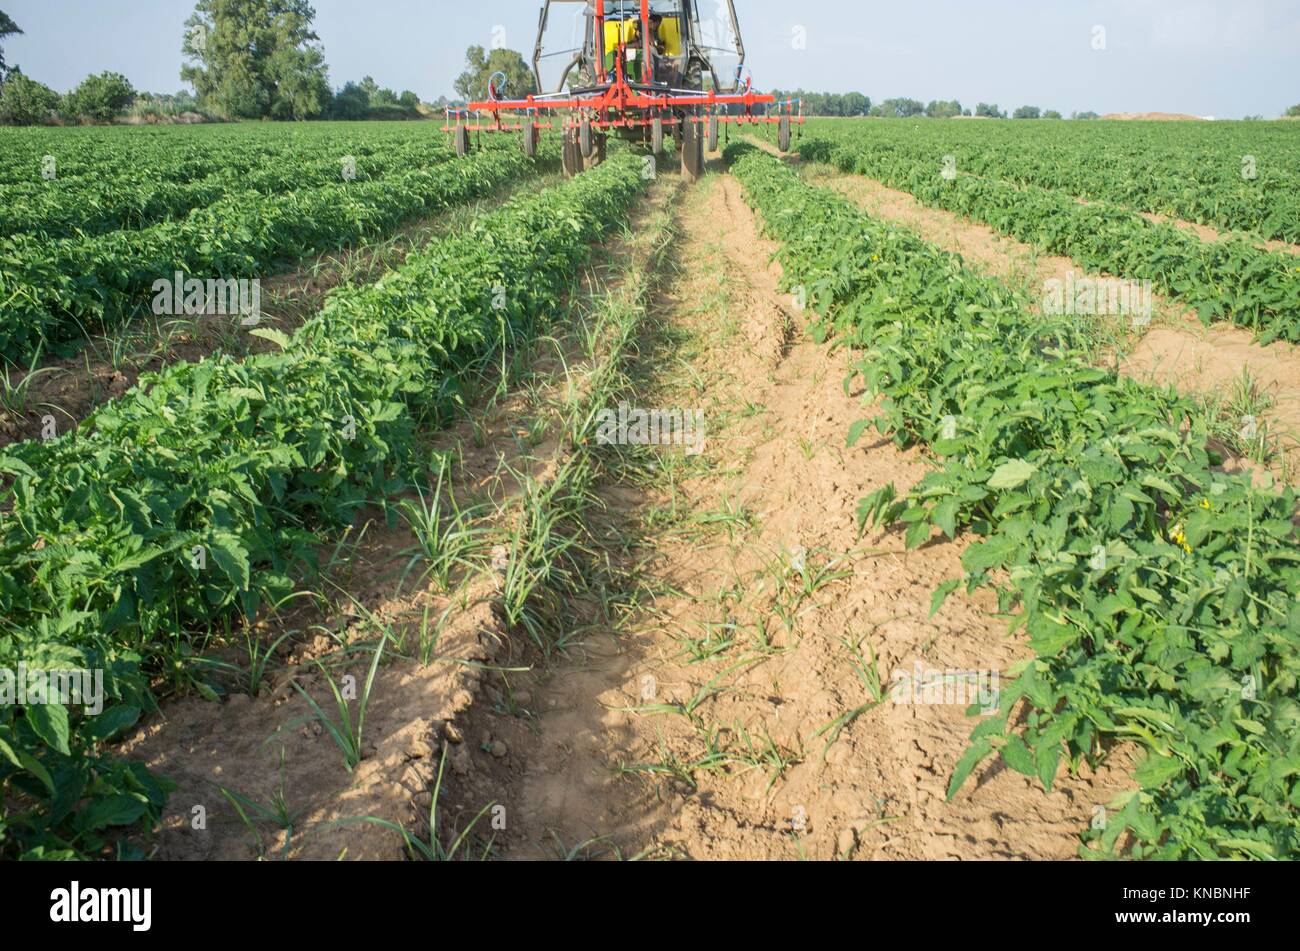 Tractor spraying pesticides over young tomato plants. Extremadura, Spain. Stock Photo